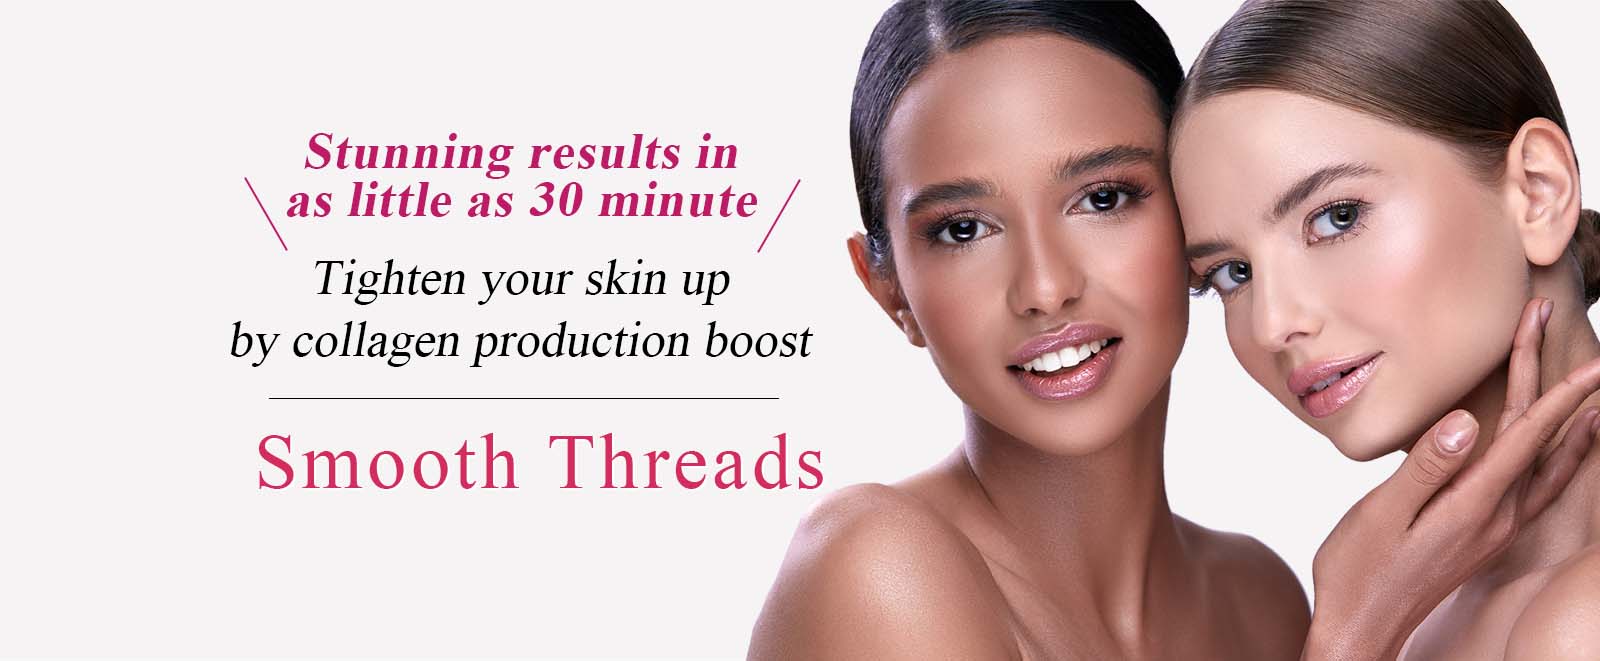 Smooth Threads - Tighten your skin up by collagen production boost